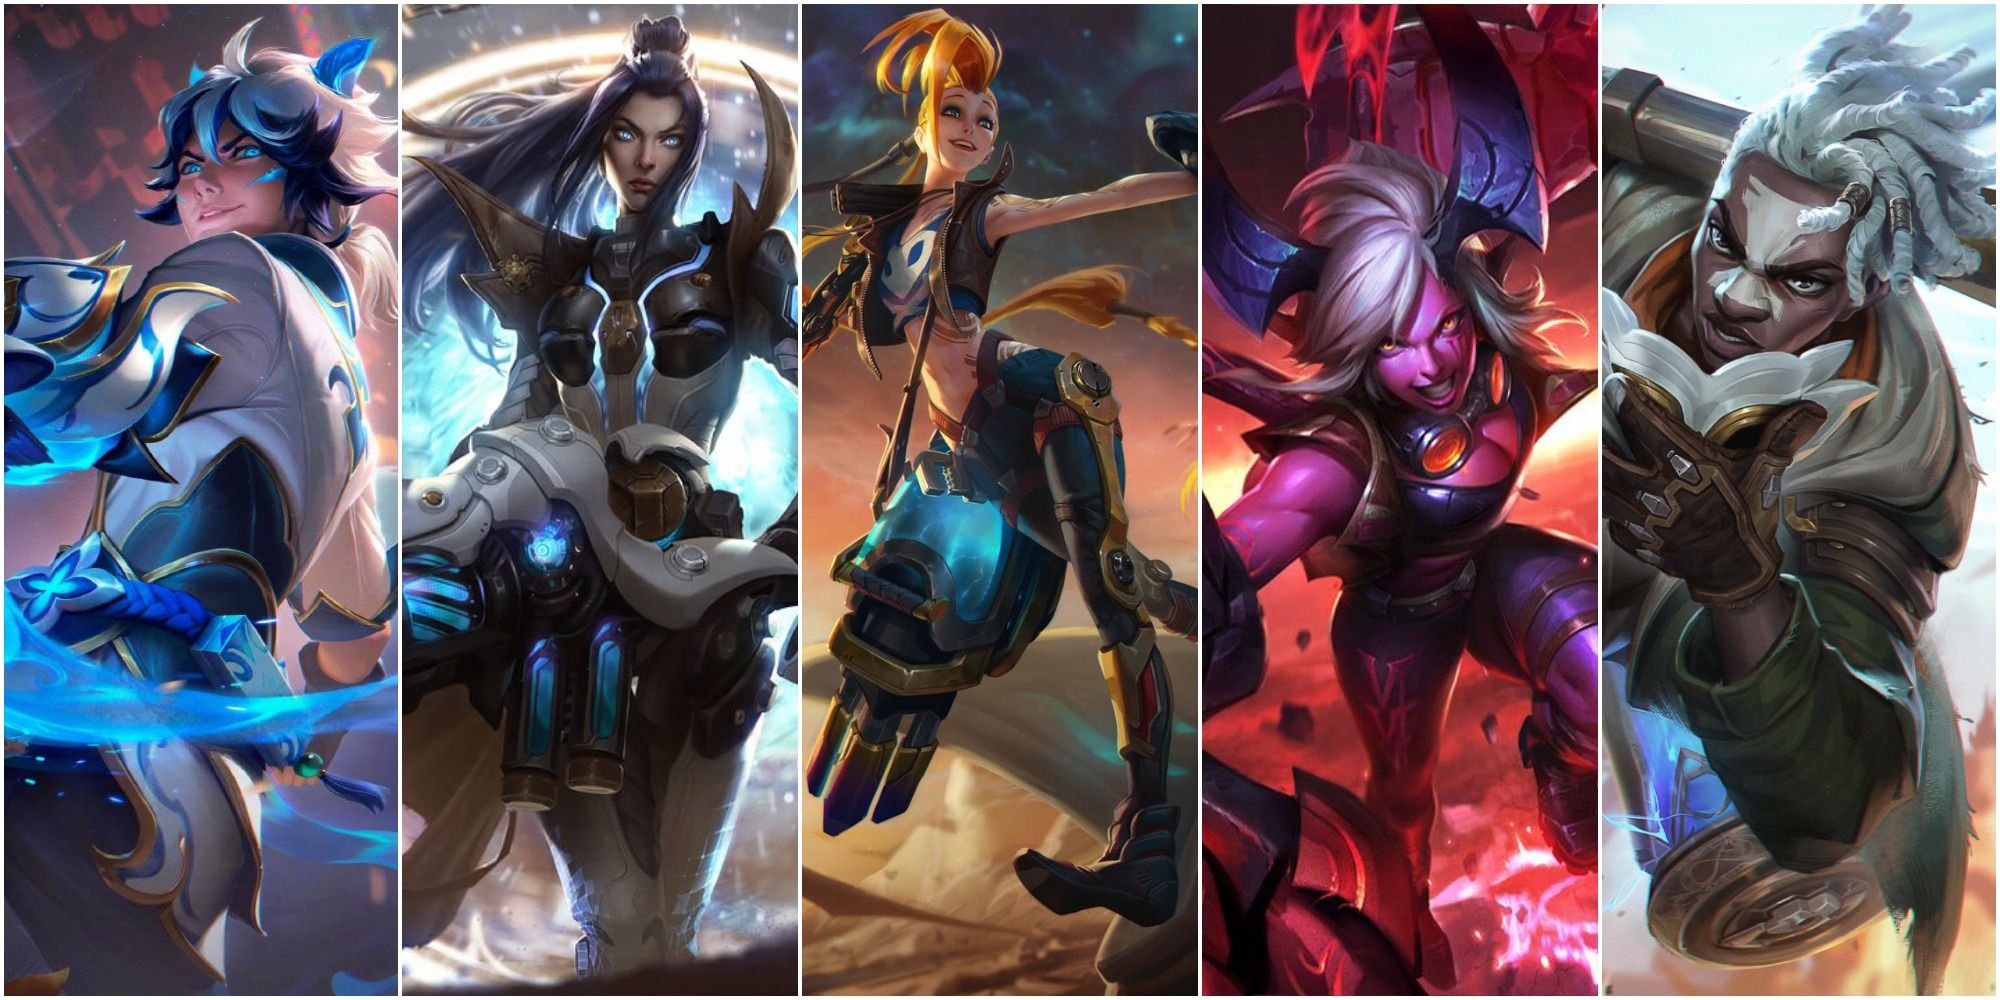 League of Legends 10 Best Champions From Zaun & Piltover feature photo featuring Ezreal, Caitlyn, Jinx, Vi, and Ekko